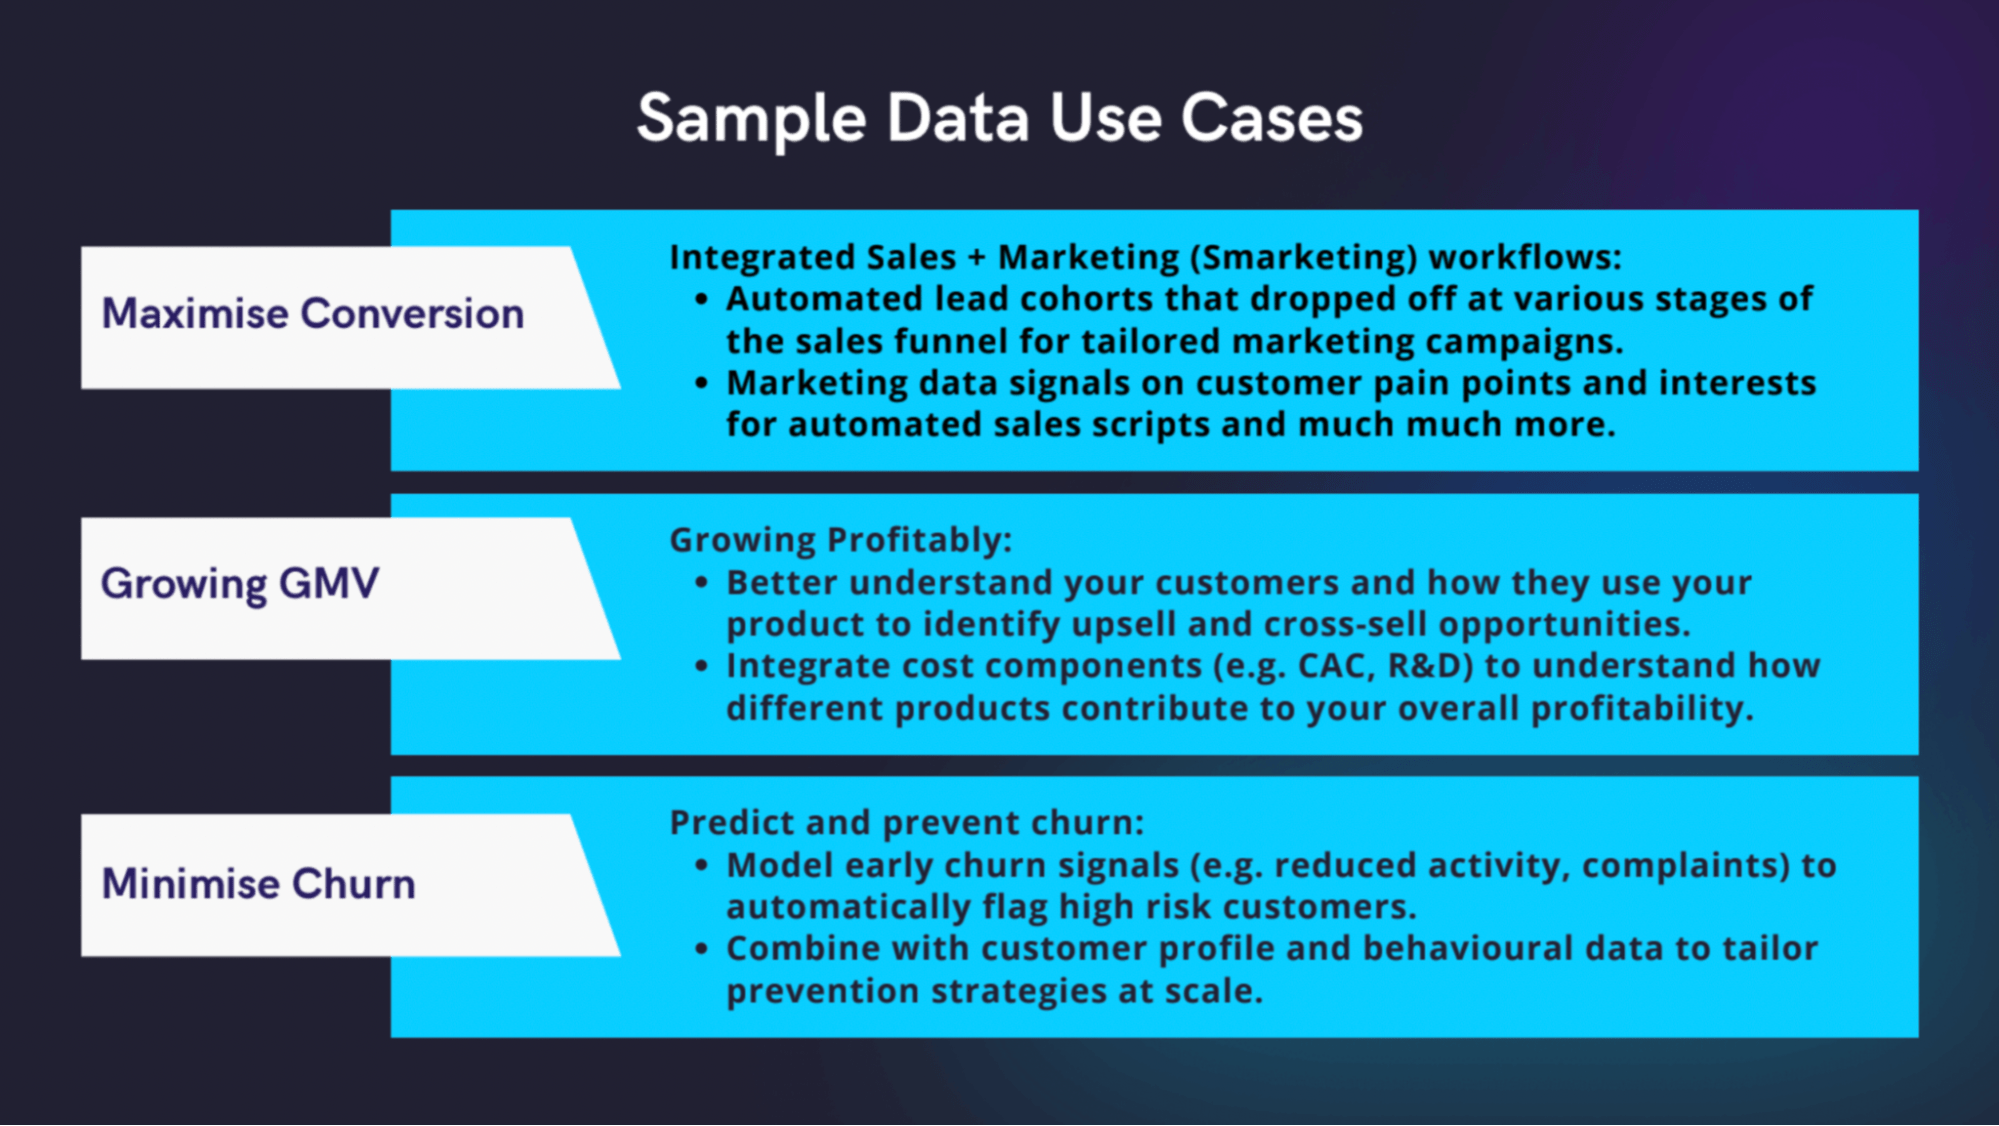 Sample data use cases